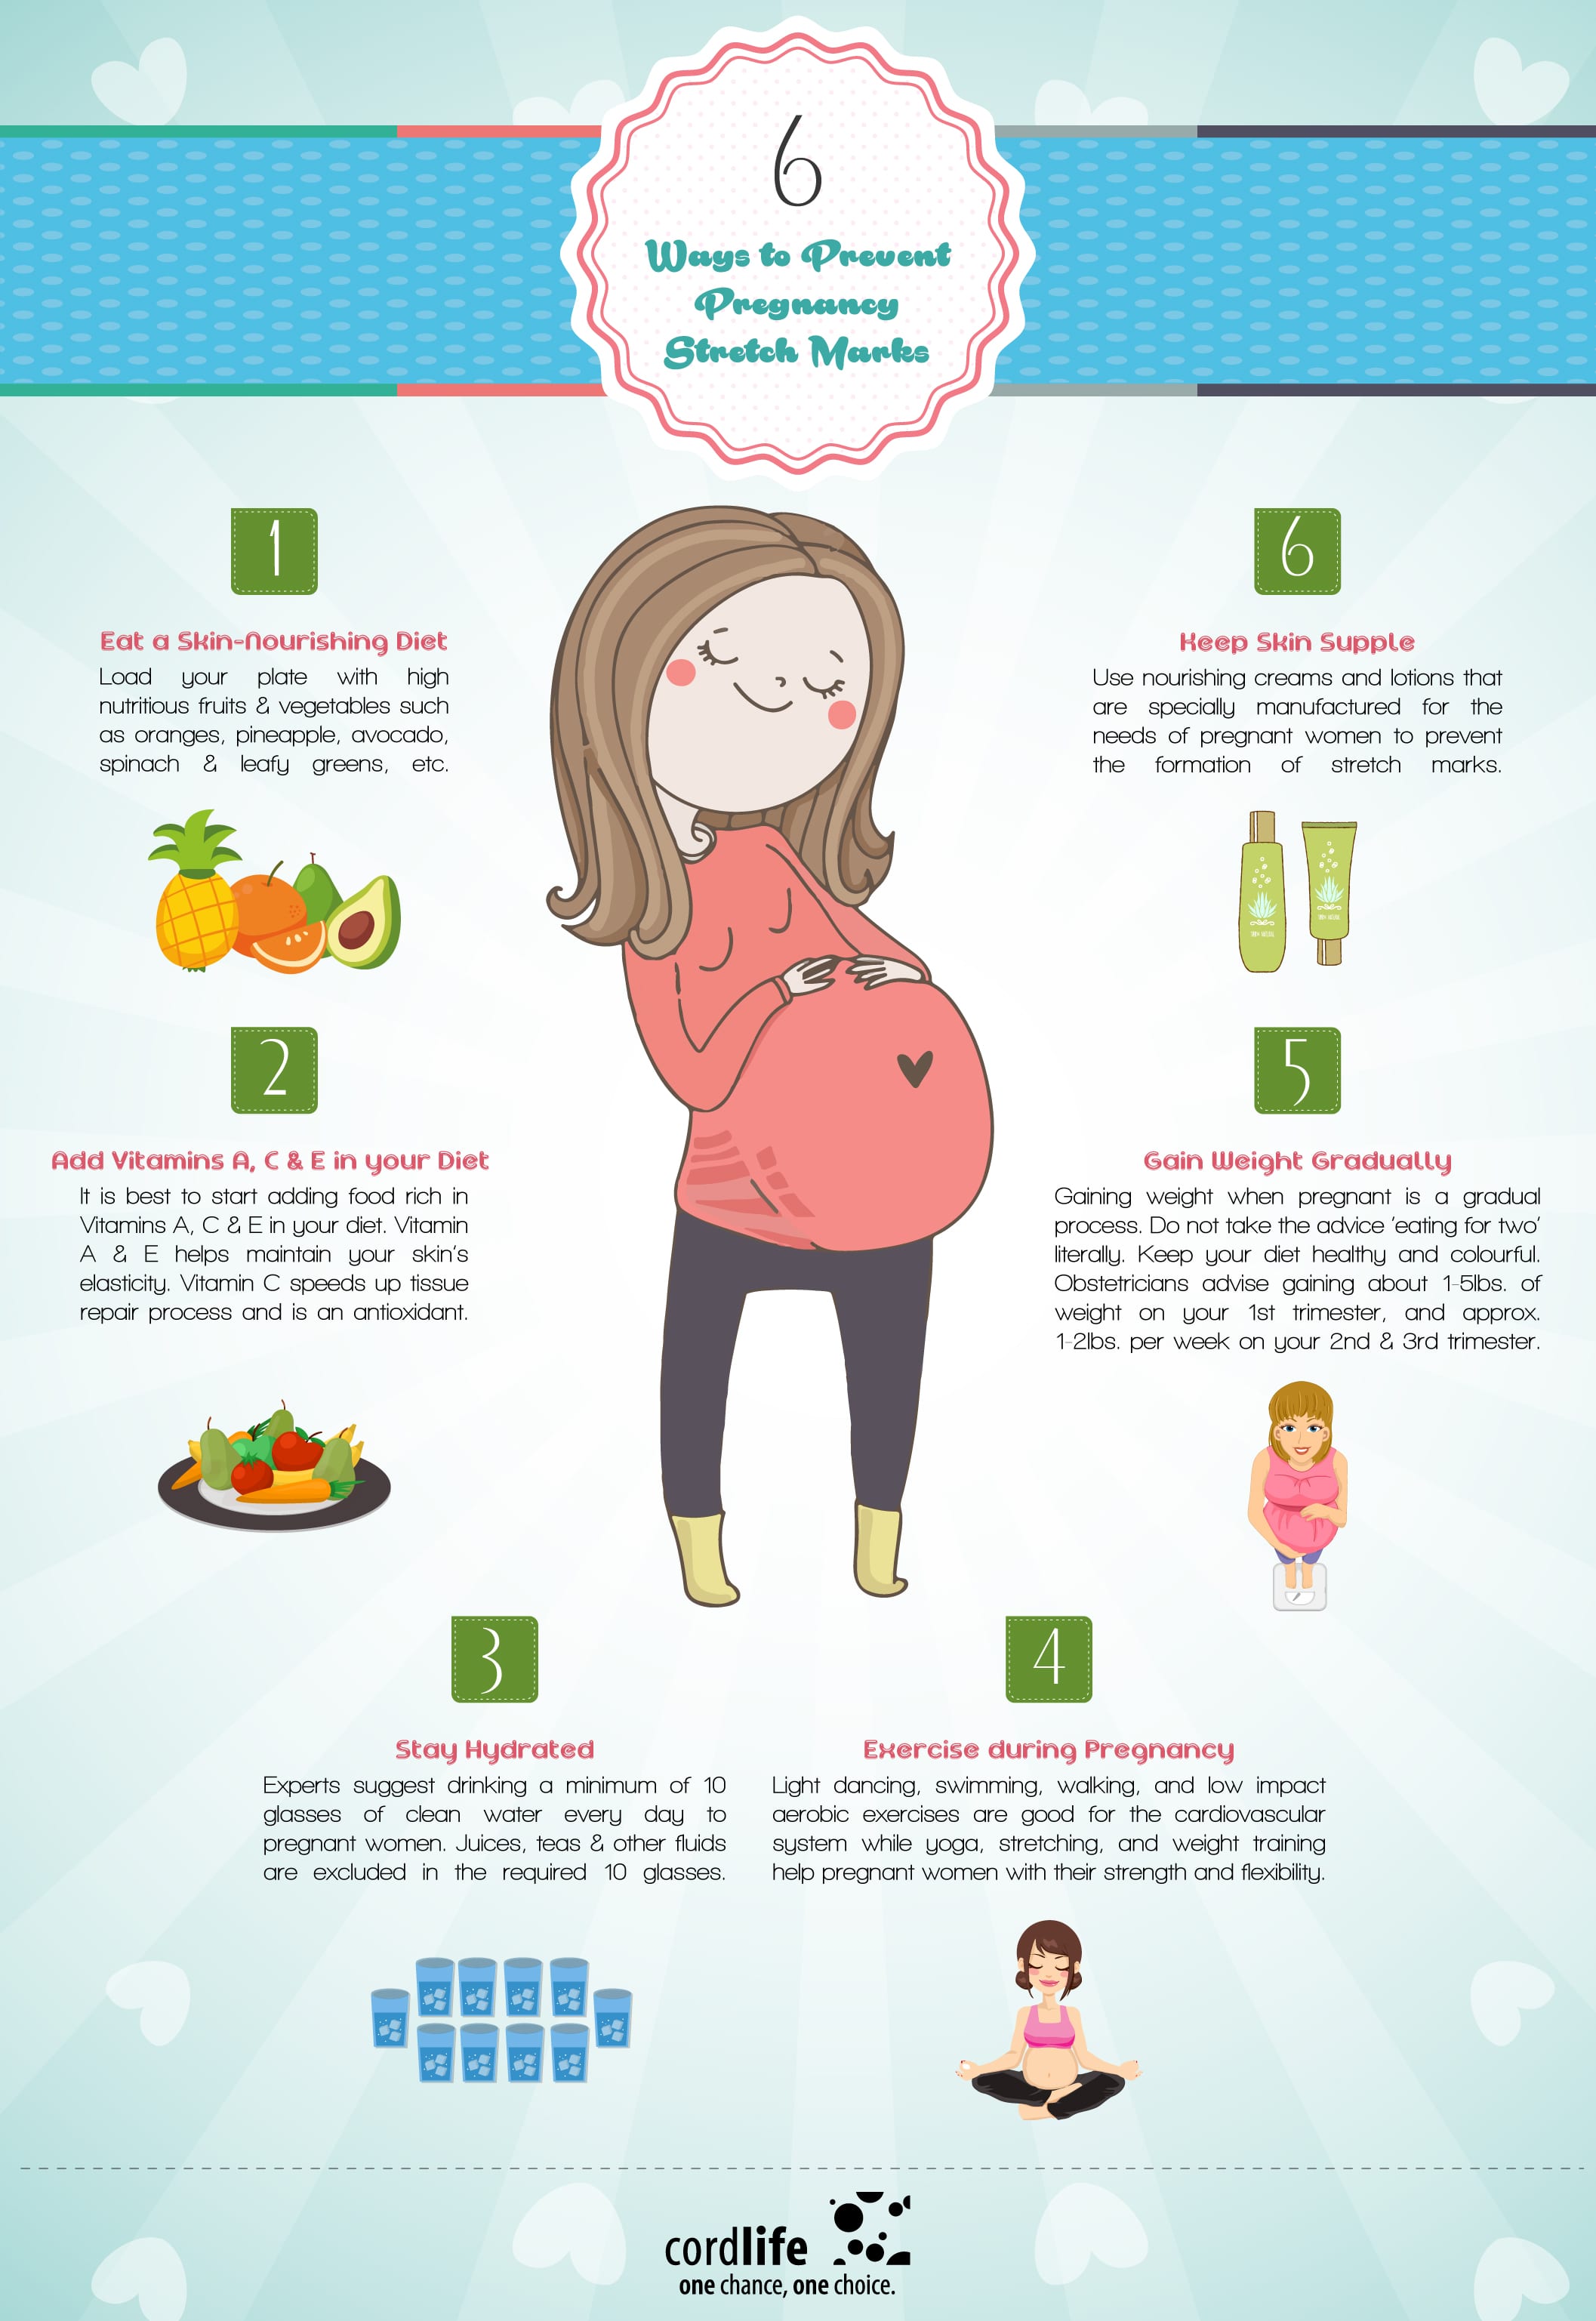 To pregnancy to prevent what do 10 Tips